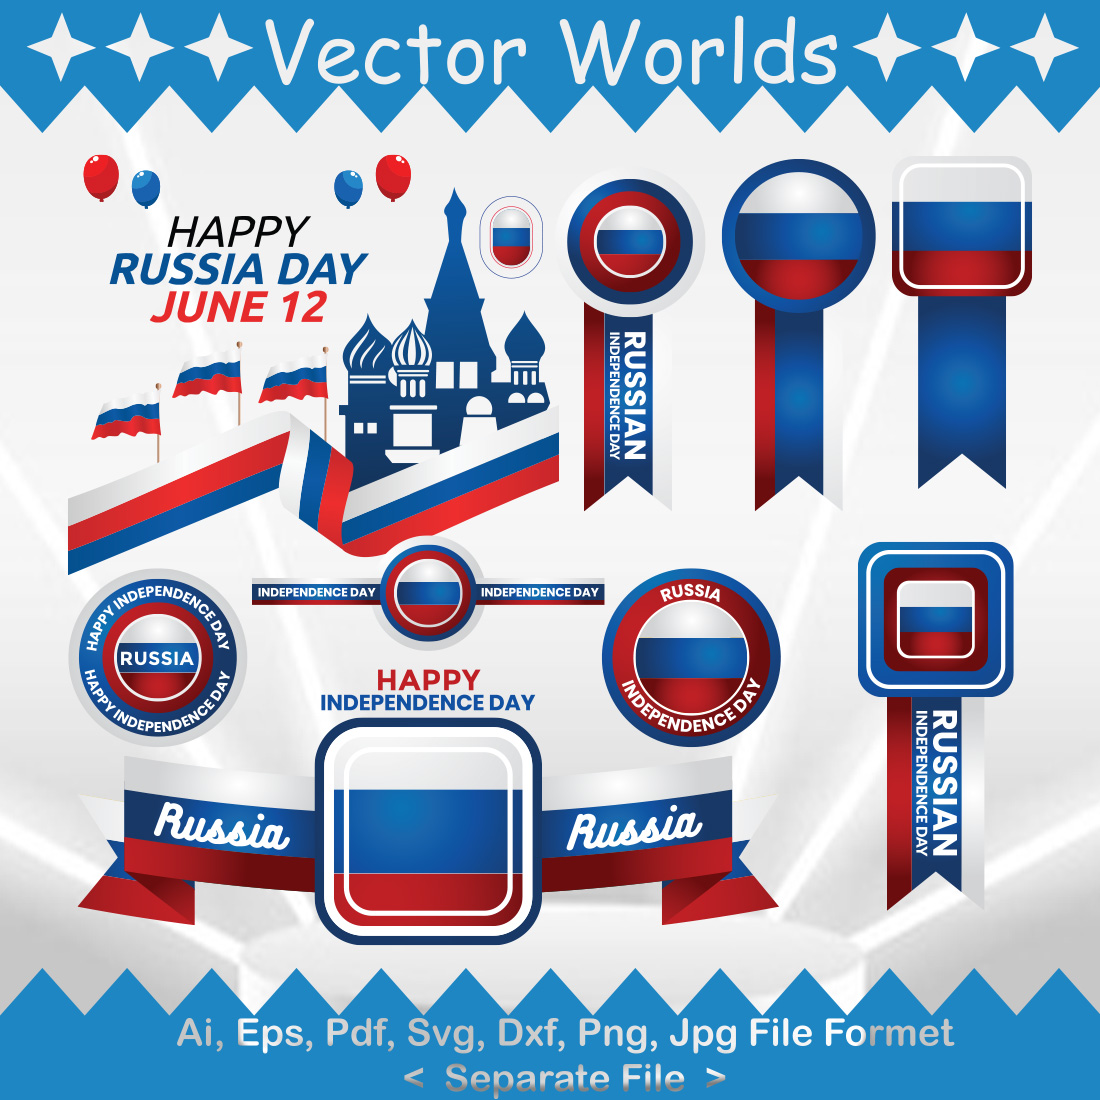 Russia VICTORY DAY SVG Vector Design cover image.